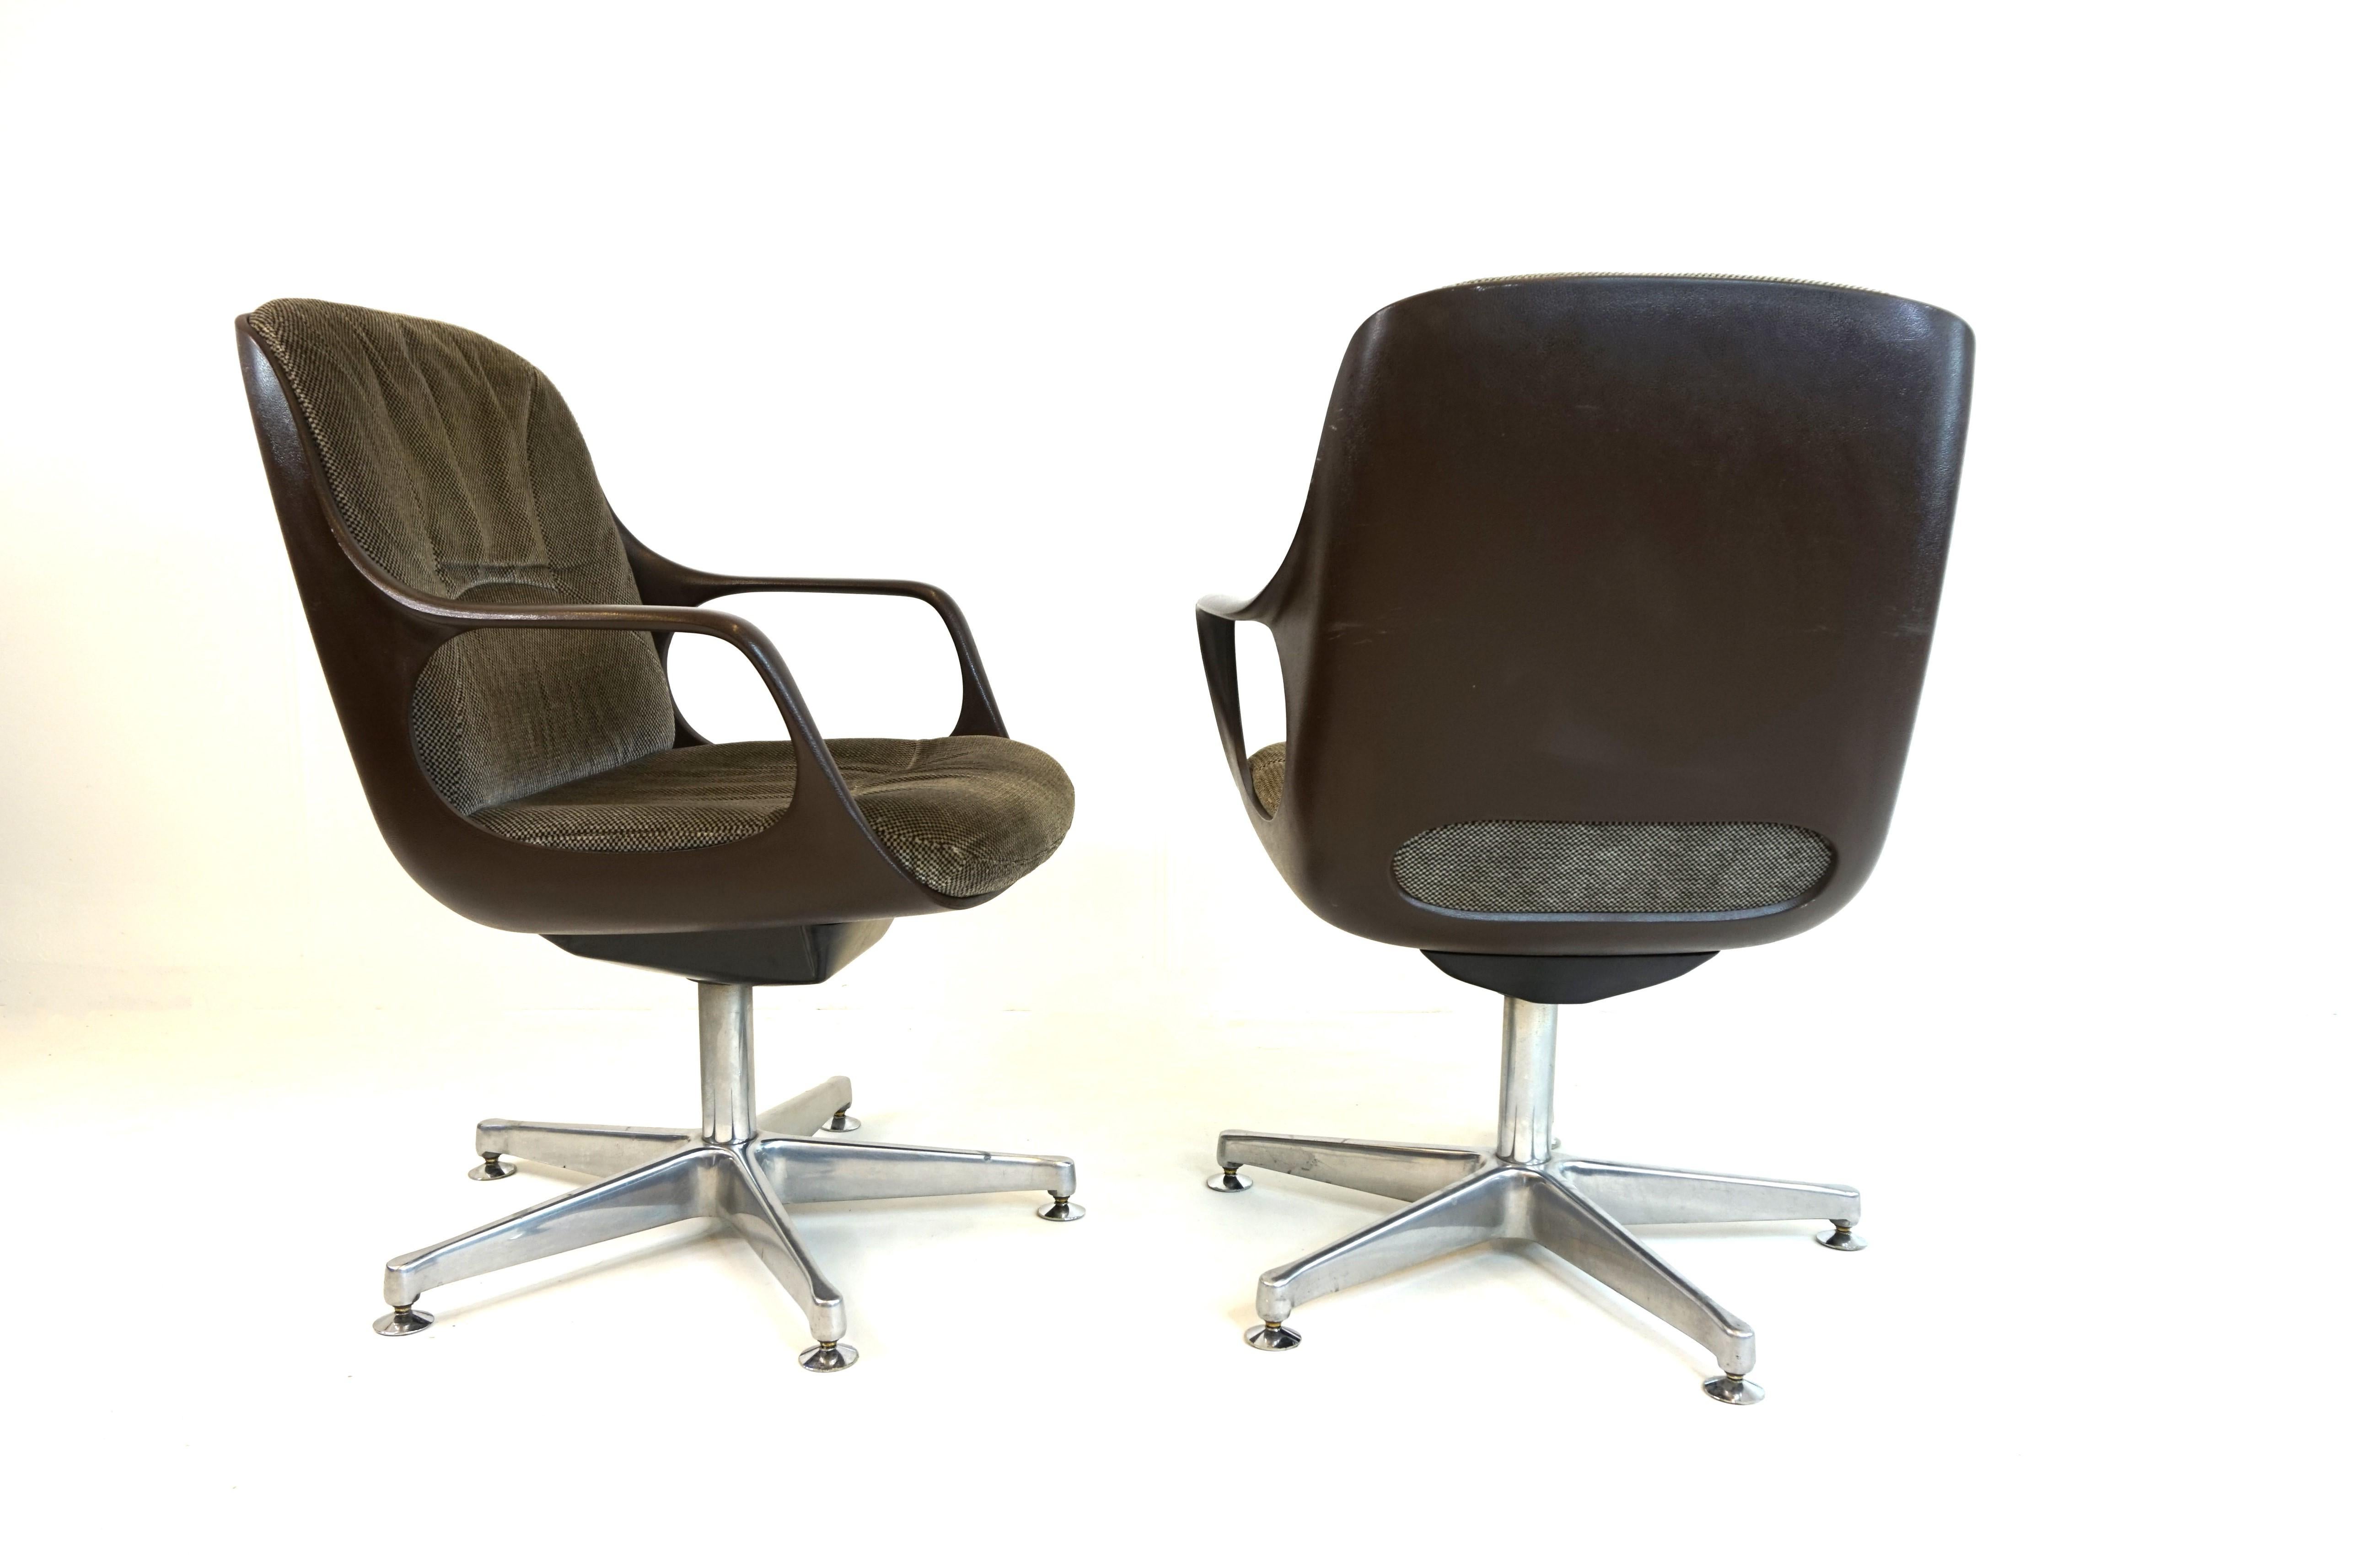 Late 20th Century Chromcraft Set of 2 Space Age Office/Dining Room Chairs